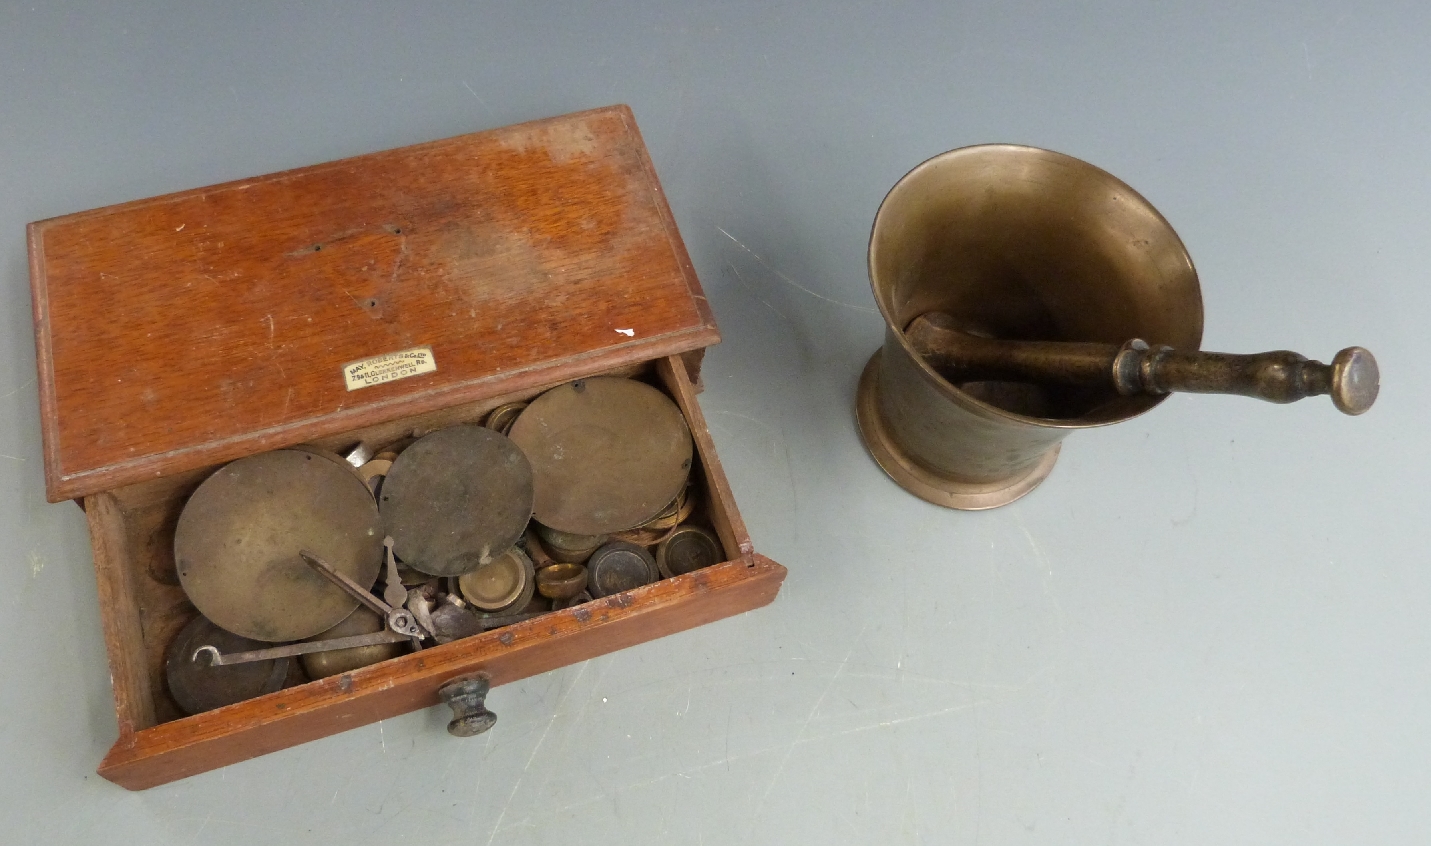 A set of weights and scales by May Roberts & Co, London, with box, together with a bronze pestle and - Image 2 of 2